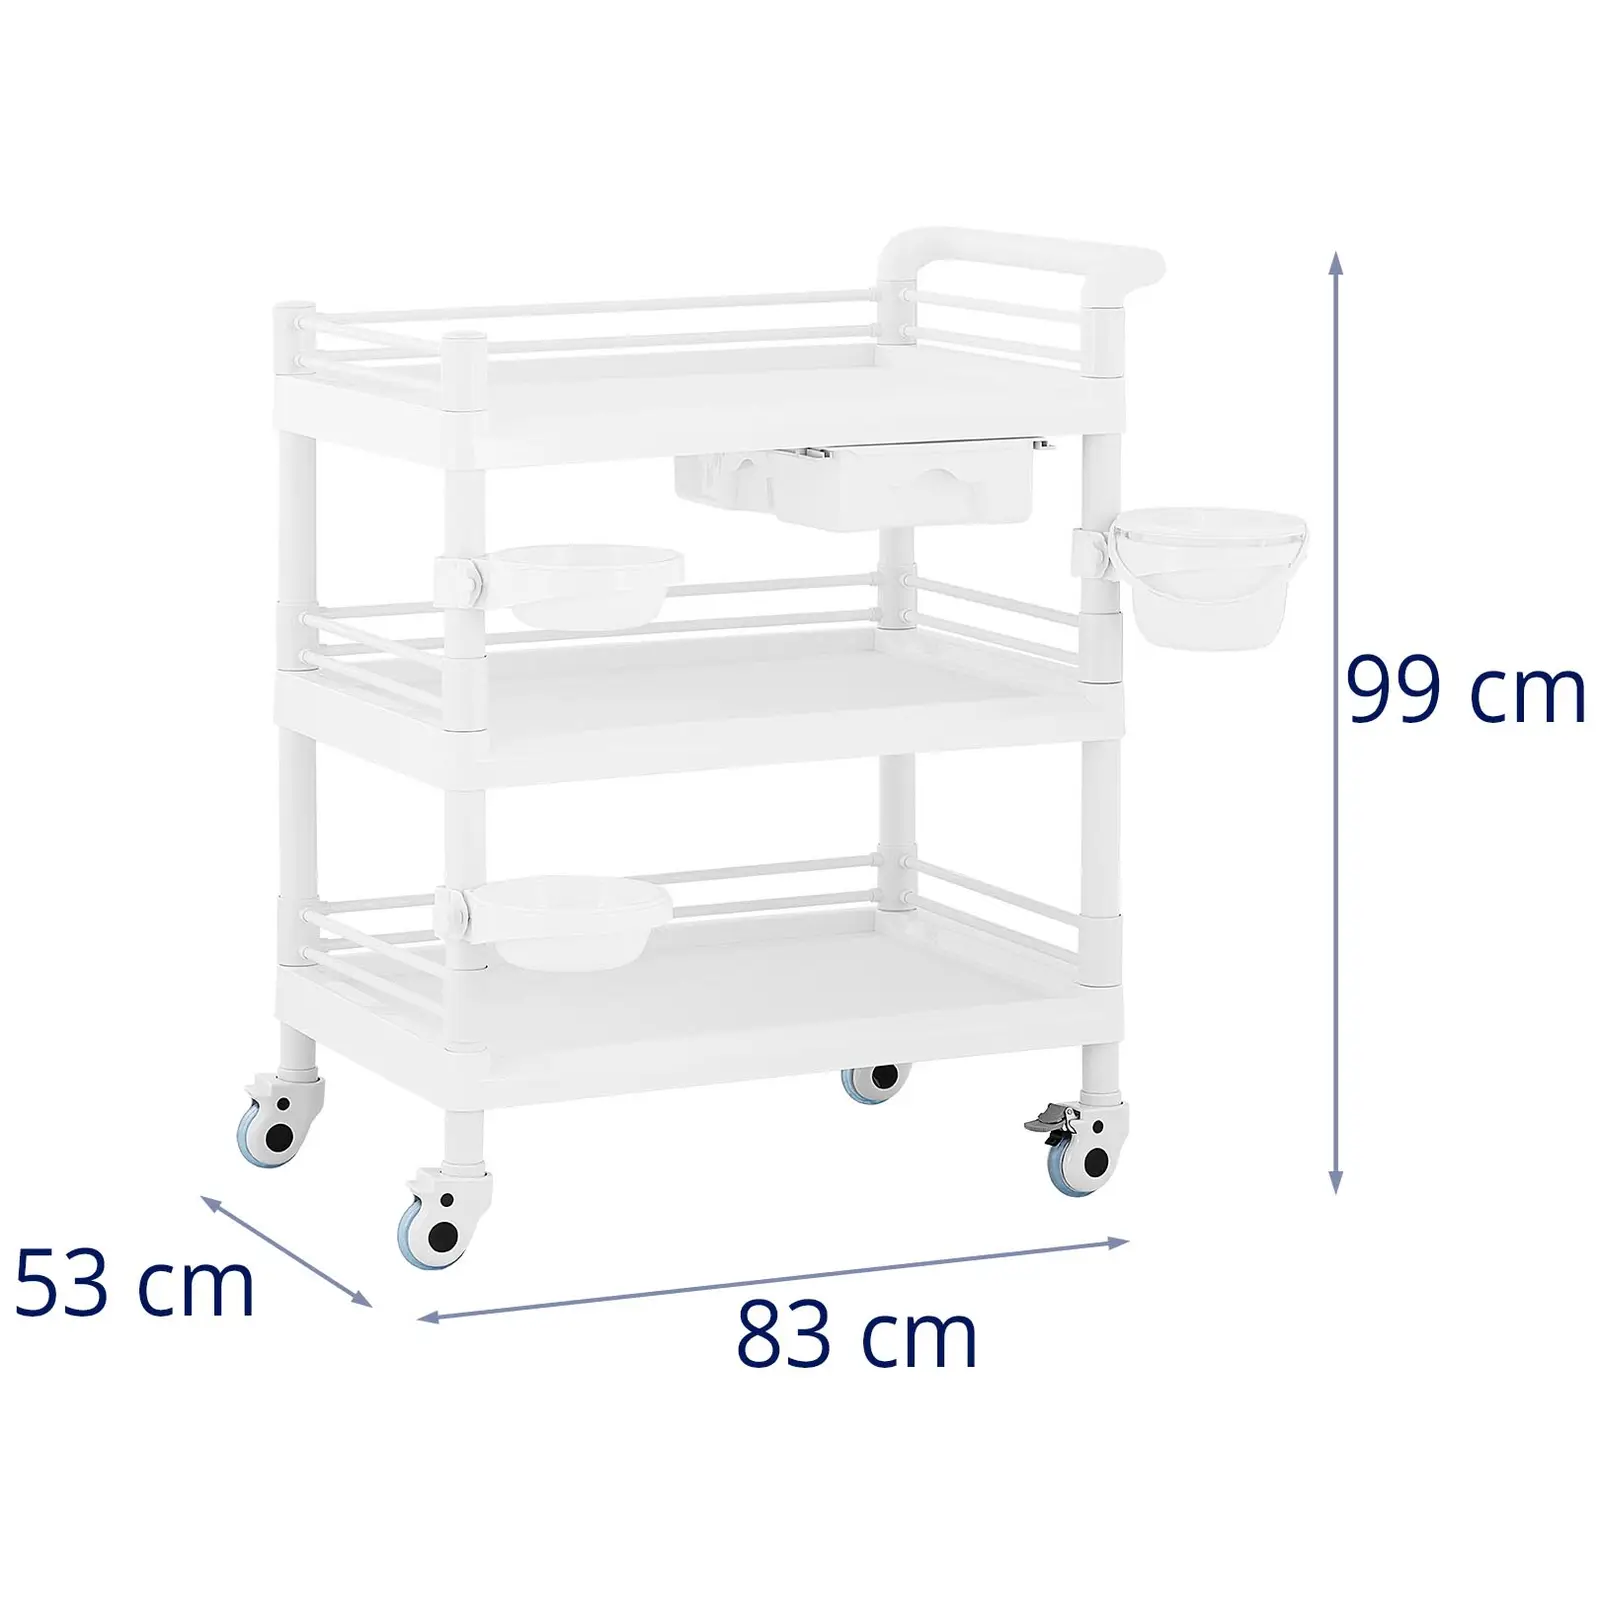 Factory second Laboratory Trolley - 3 shelves each 65 x 47 x 5 cm - 1 drawer - 3 containers - 60 kg